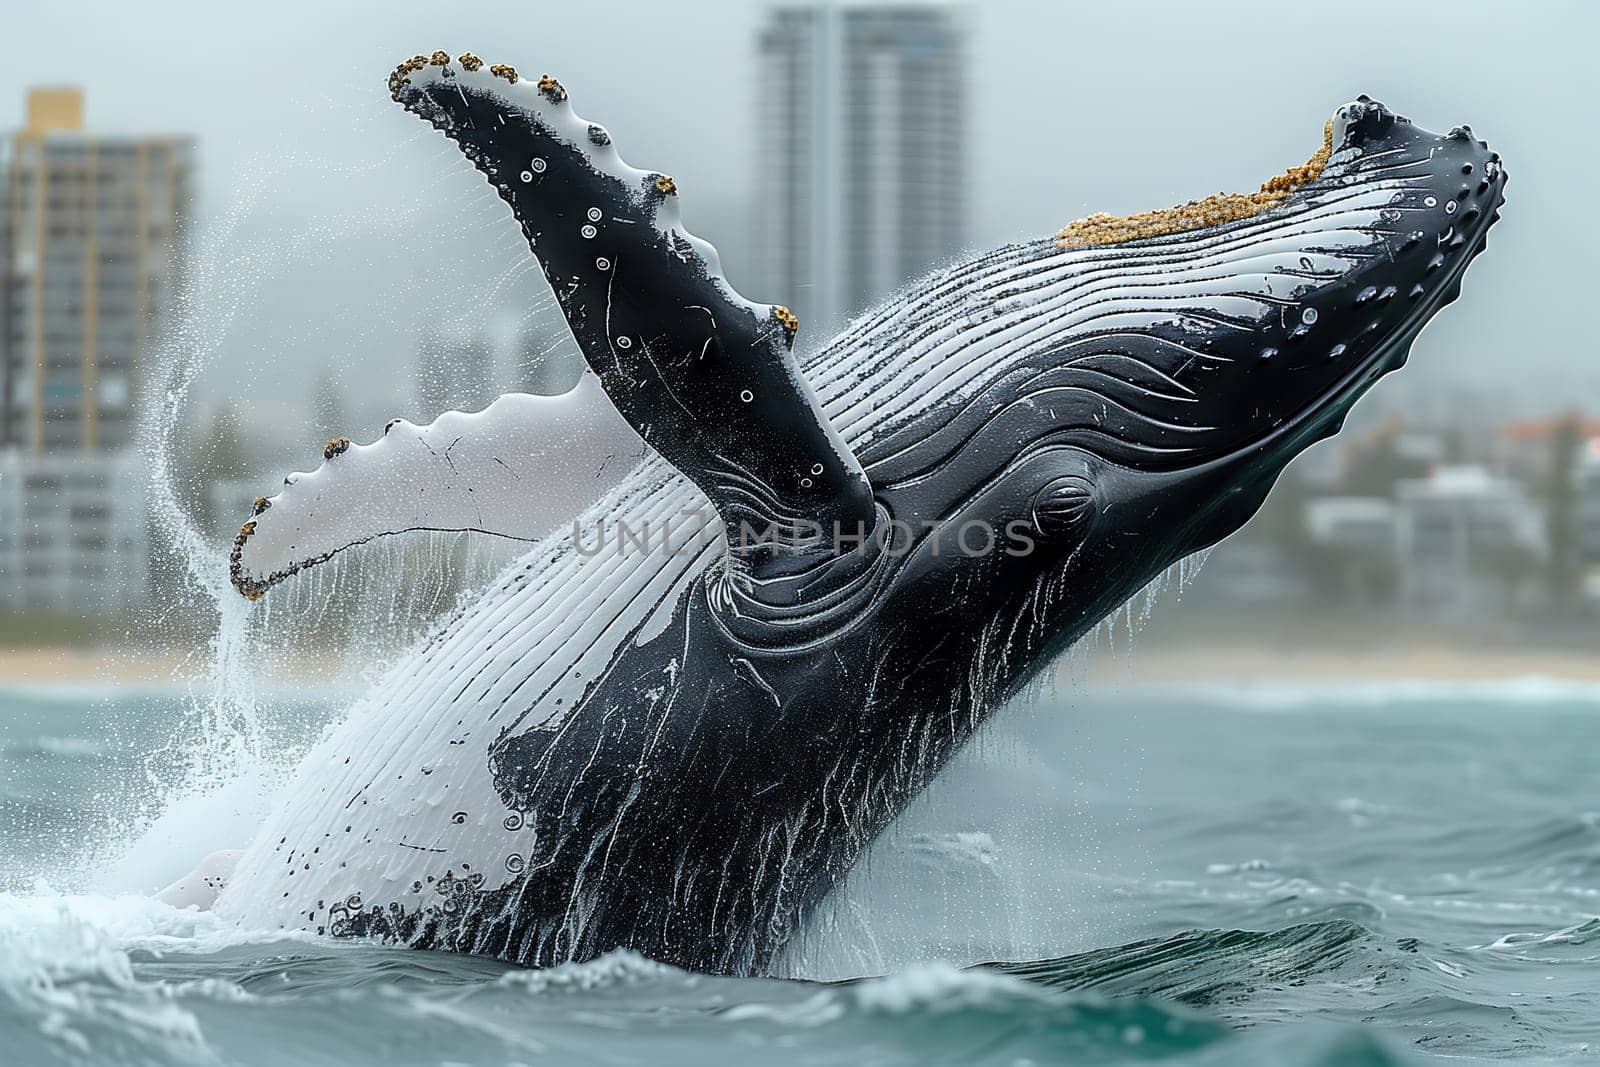 A humpback whale breaches the water, soaring like a bird in the sky. This display of marine biology is a stunning sight in the fluid world of the ocean